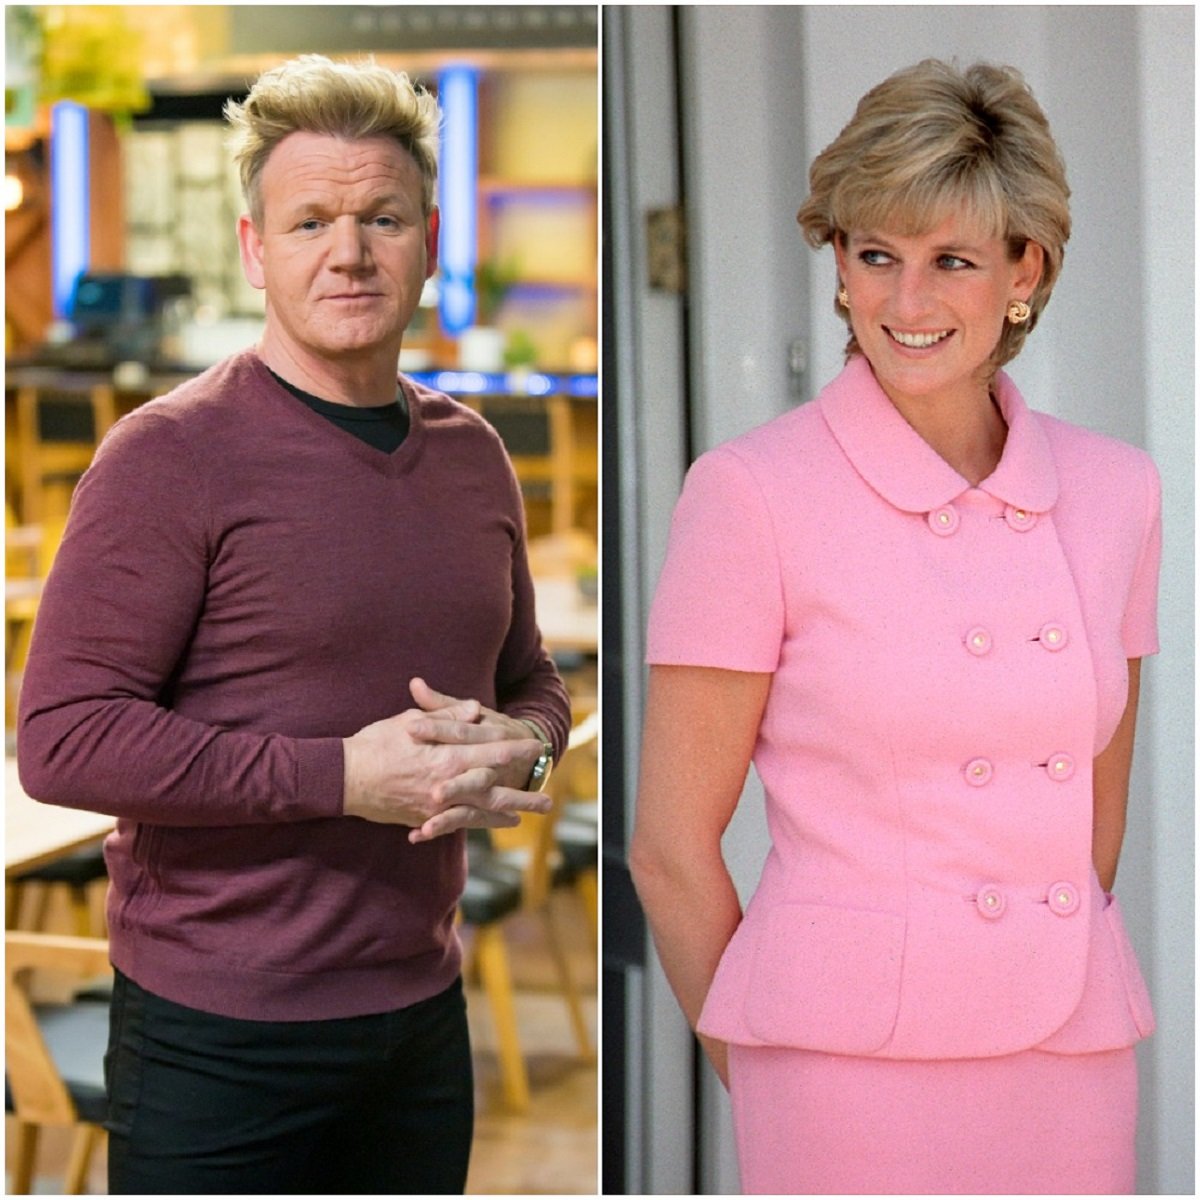 (L) Gordon Ramsay in the finale episode of '24 Hours to Hell and Back', (R) Princess Diana wearing a pick outfit in Argentina